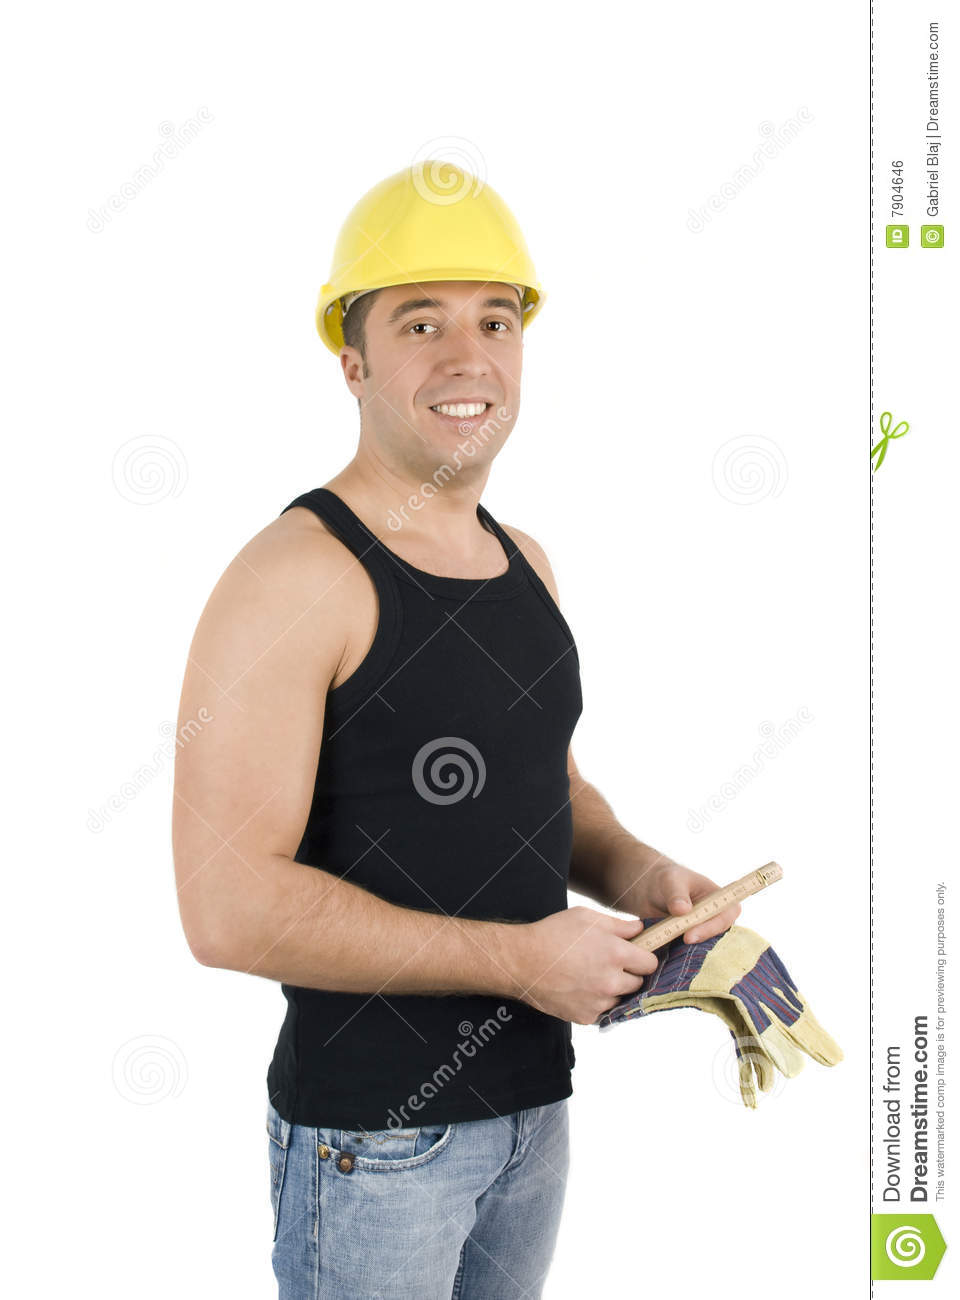 Happy Worker Royalty Free Stock Image   Image  7904646